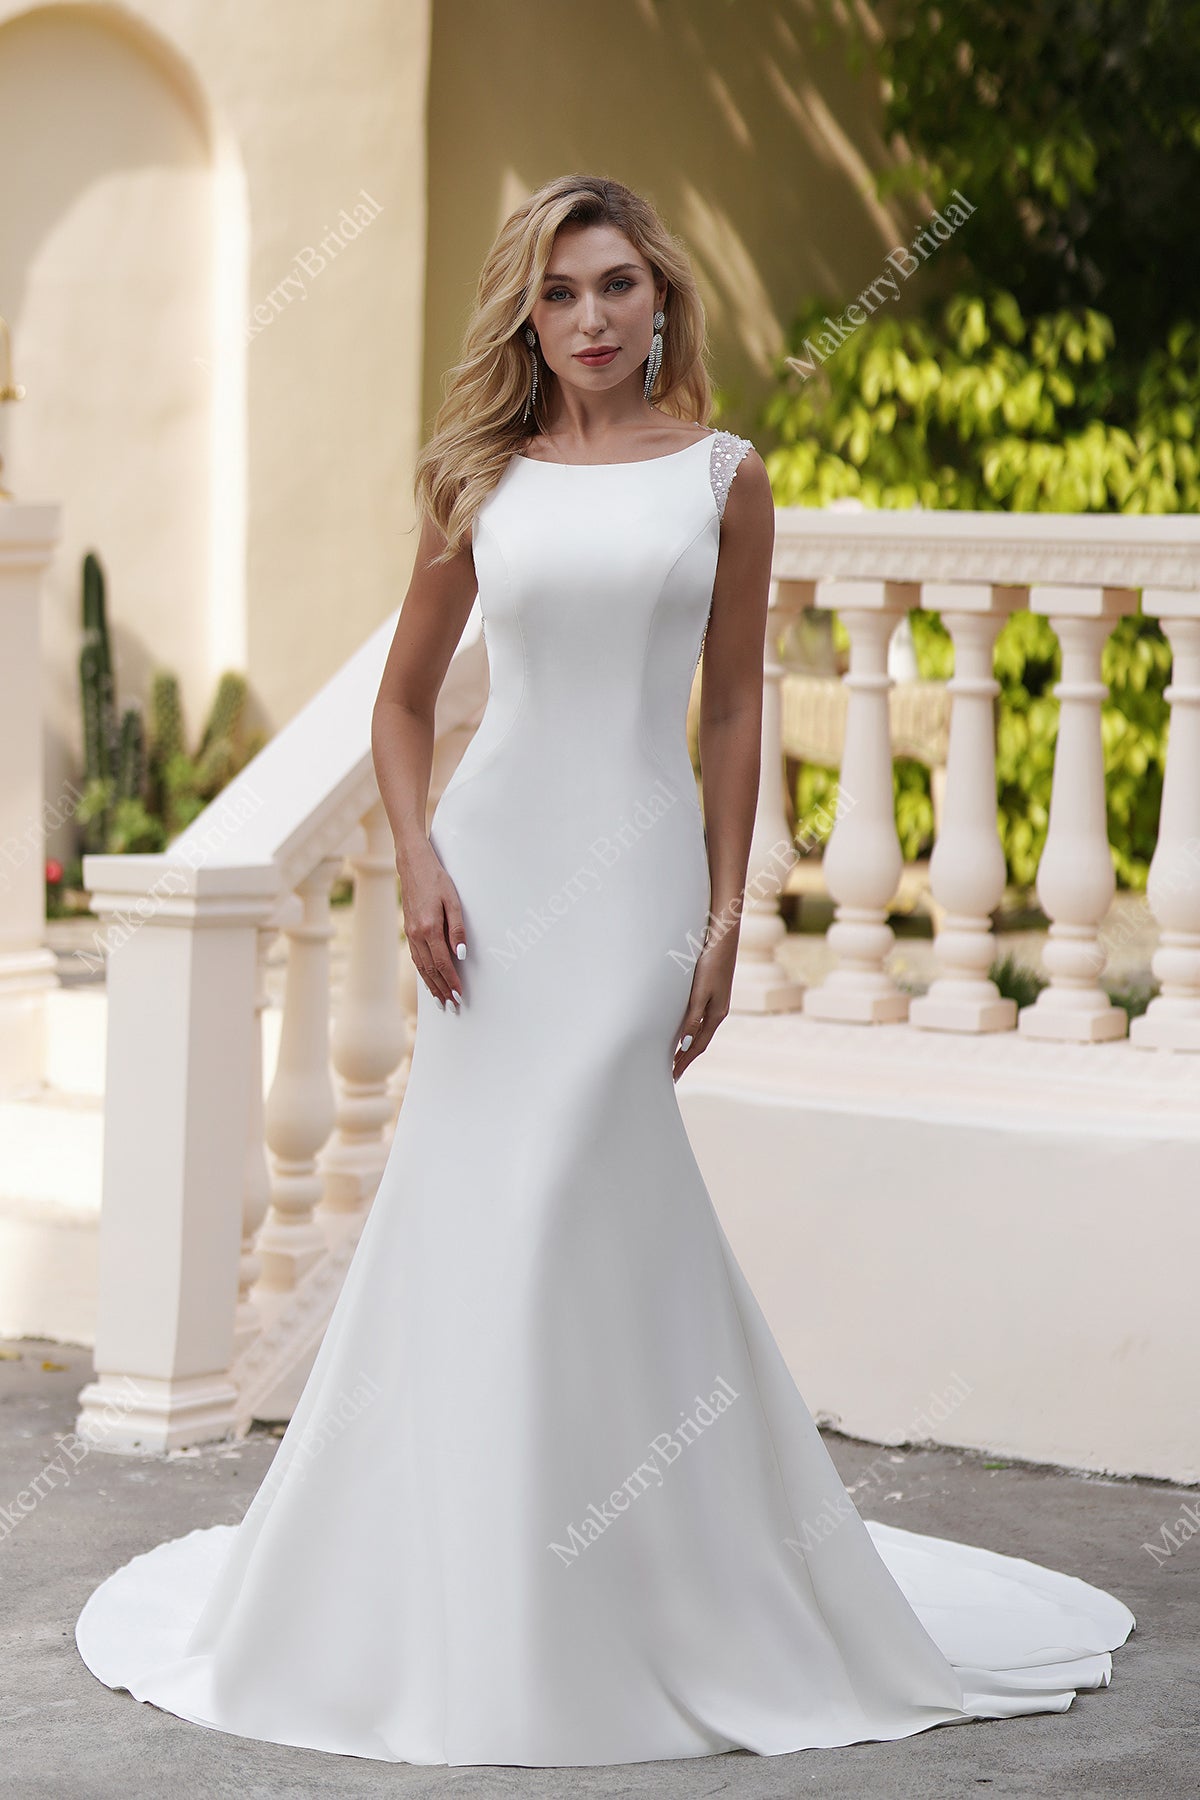 Simple Satin Wedding Dresses With Beaded Backless, 44% OFF